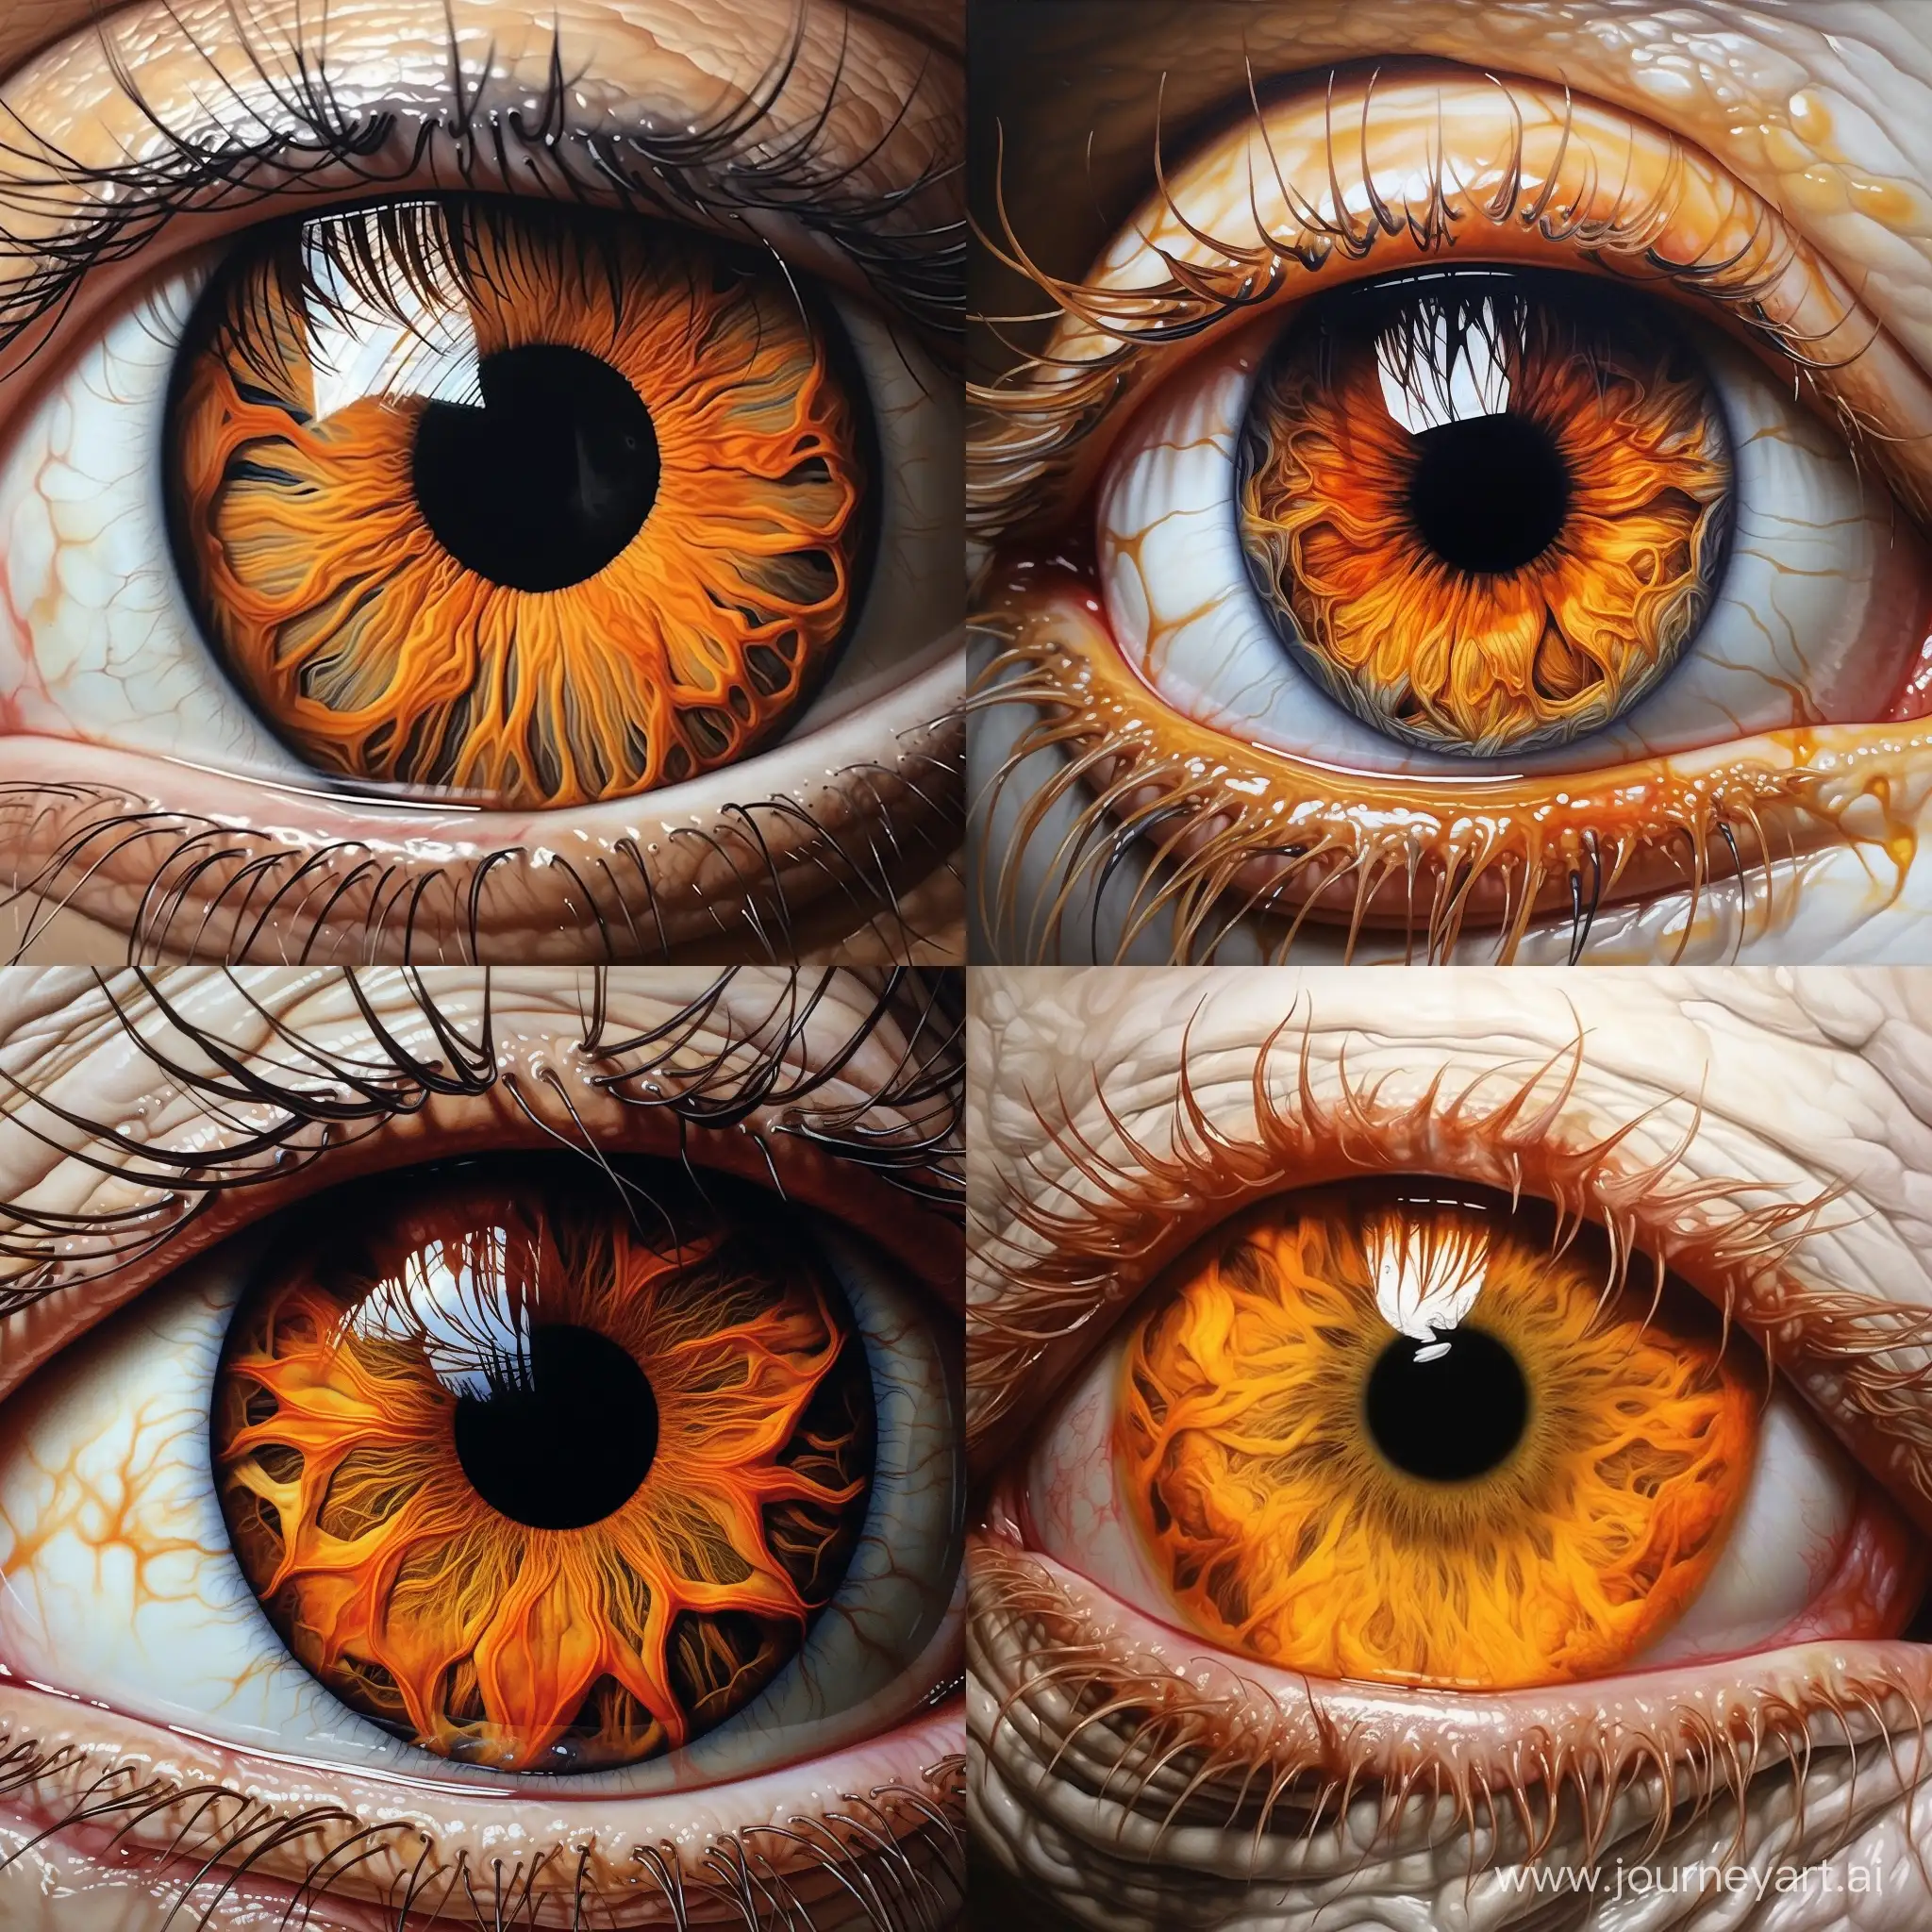 Photorealism. A monster whose veins, eyes and heart glow bright orange. The whites of the eyes are black, the skin is pale purple